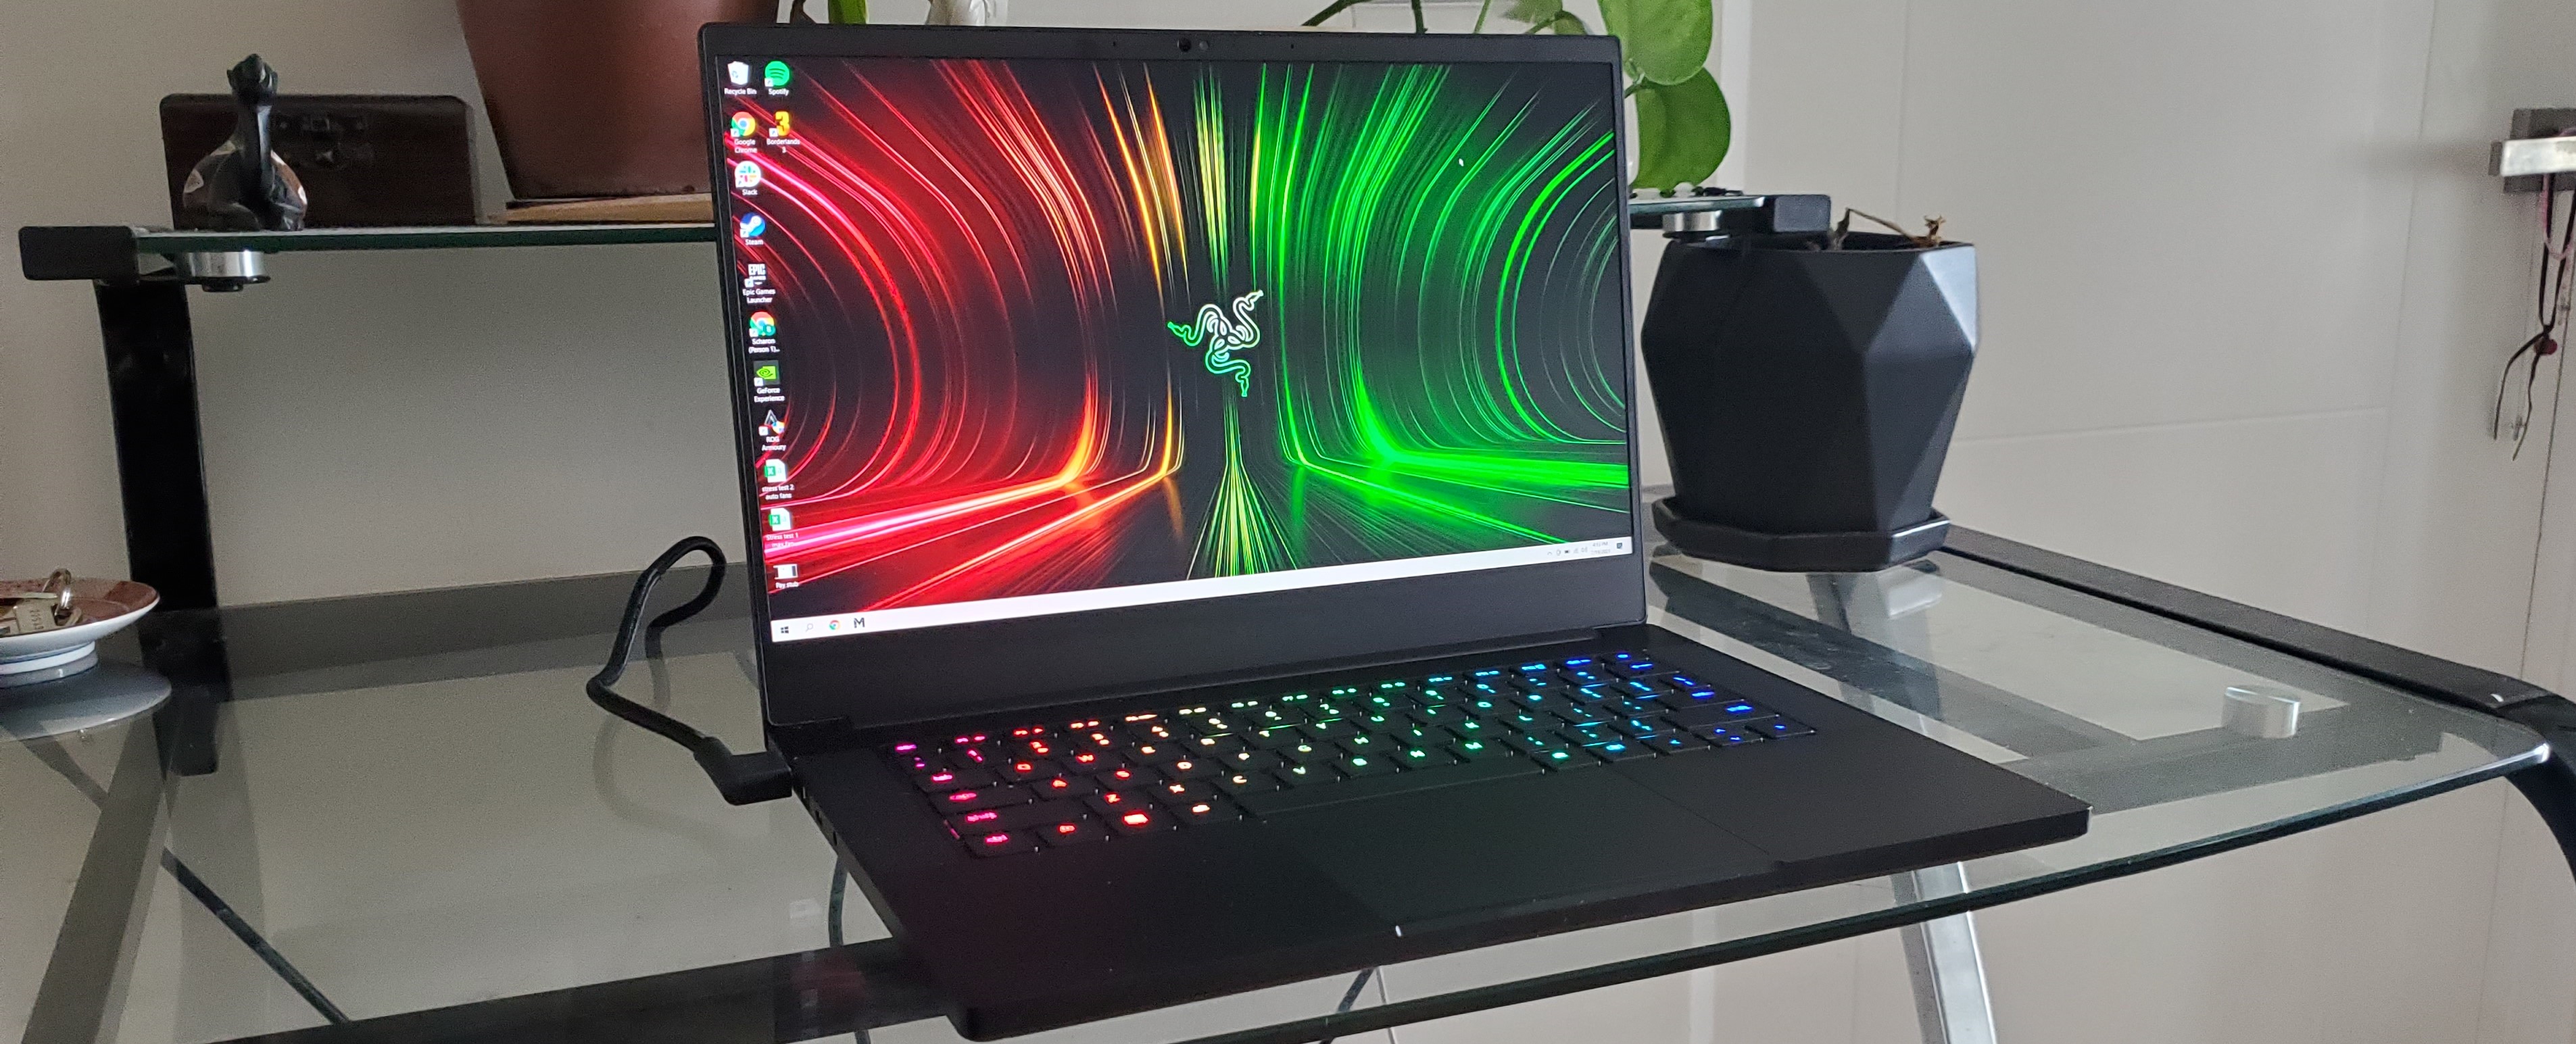 Razer Blade 14 Review: AMD Finally Makes the Cut Tom's Hardware